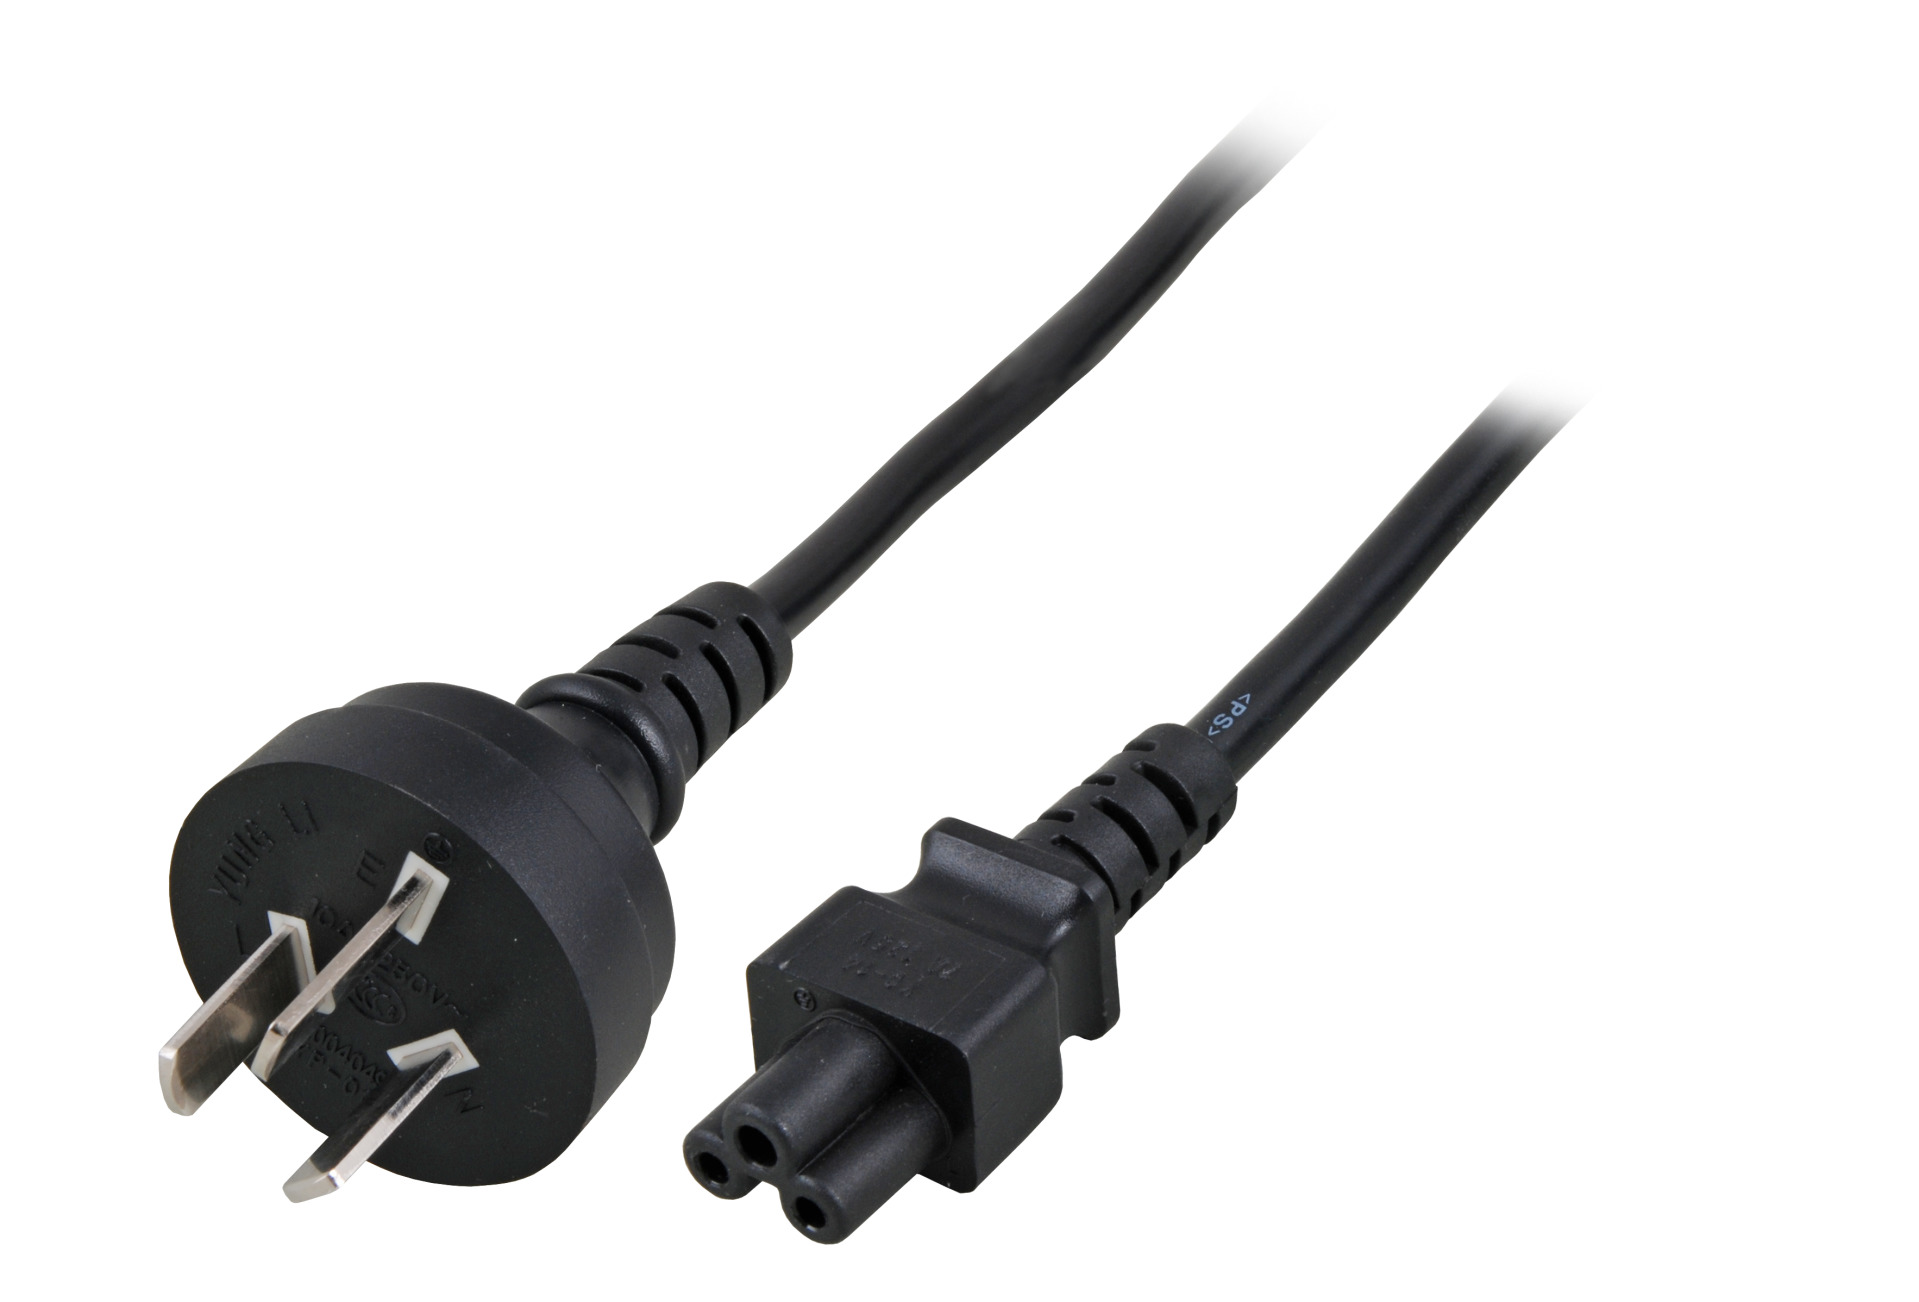 Power Cable China Type I - C5 180°, Black, 1.8 m, 3 x 0.75 mm²